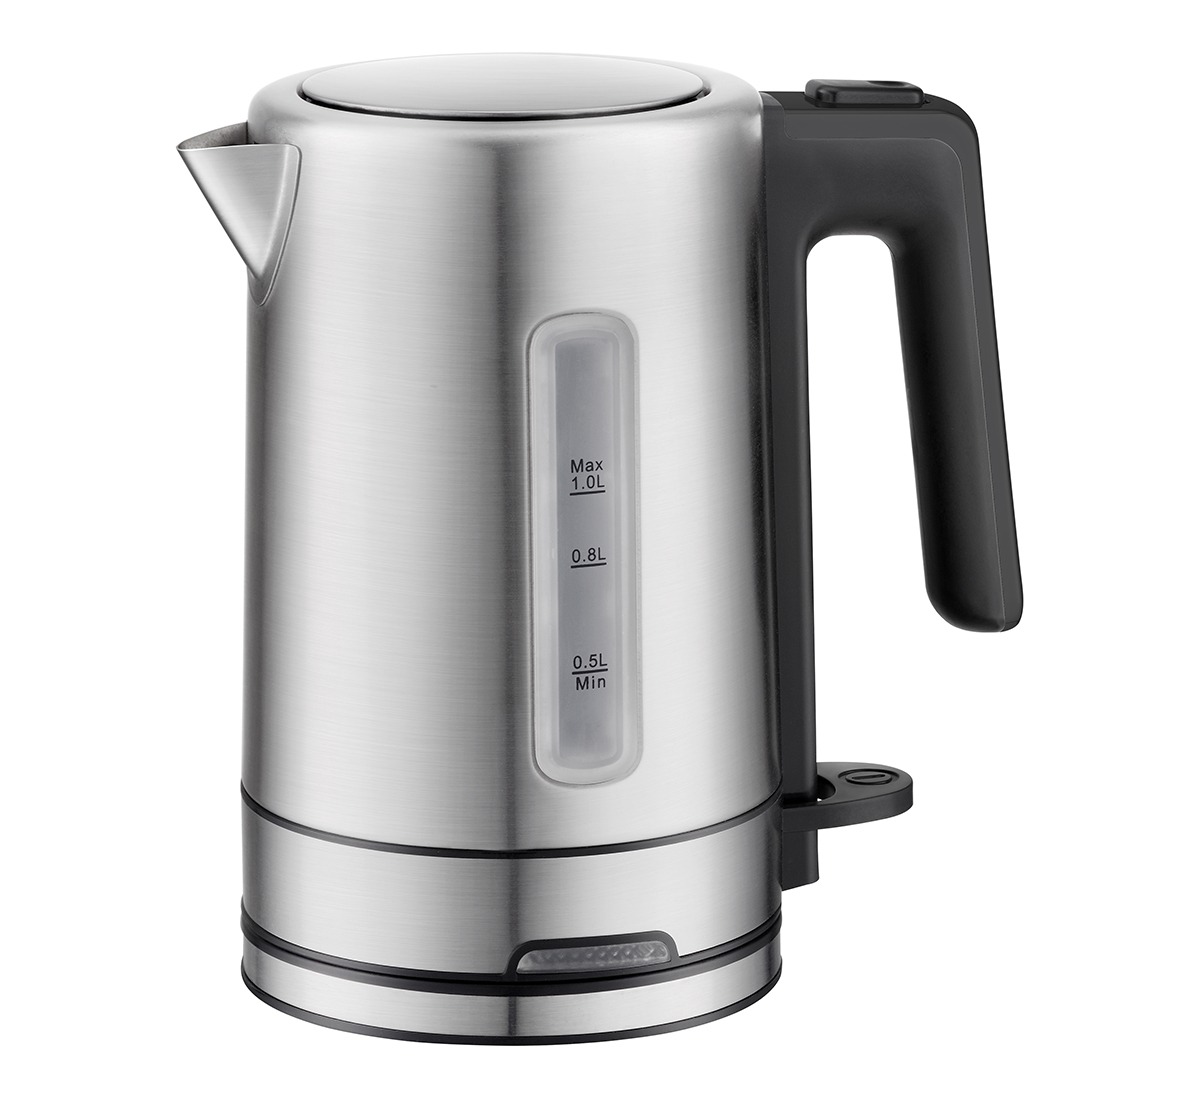 1LTR SLIVER STAINLESS STEEL ELECTRIC KETTLE
